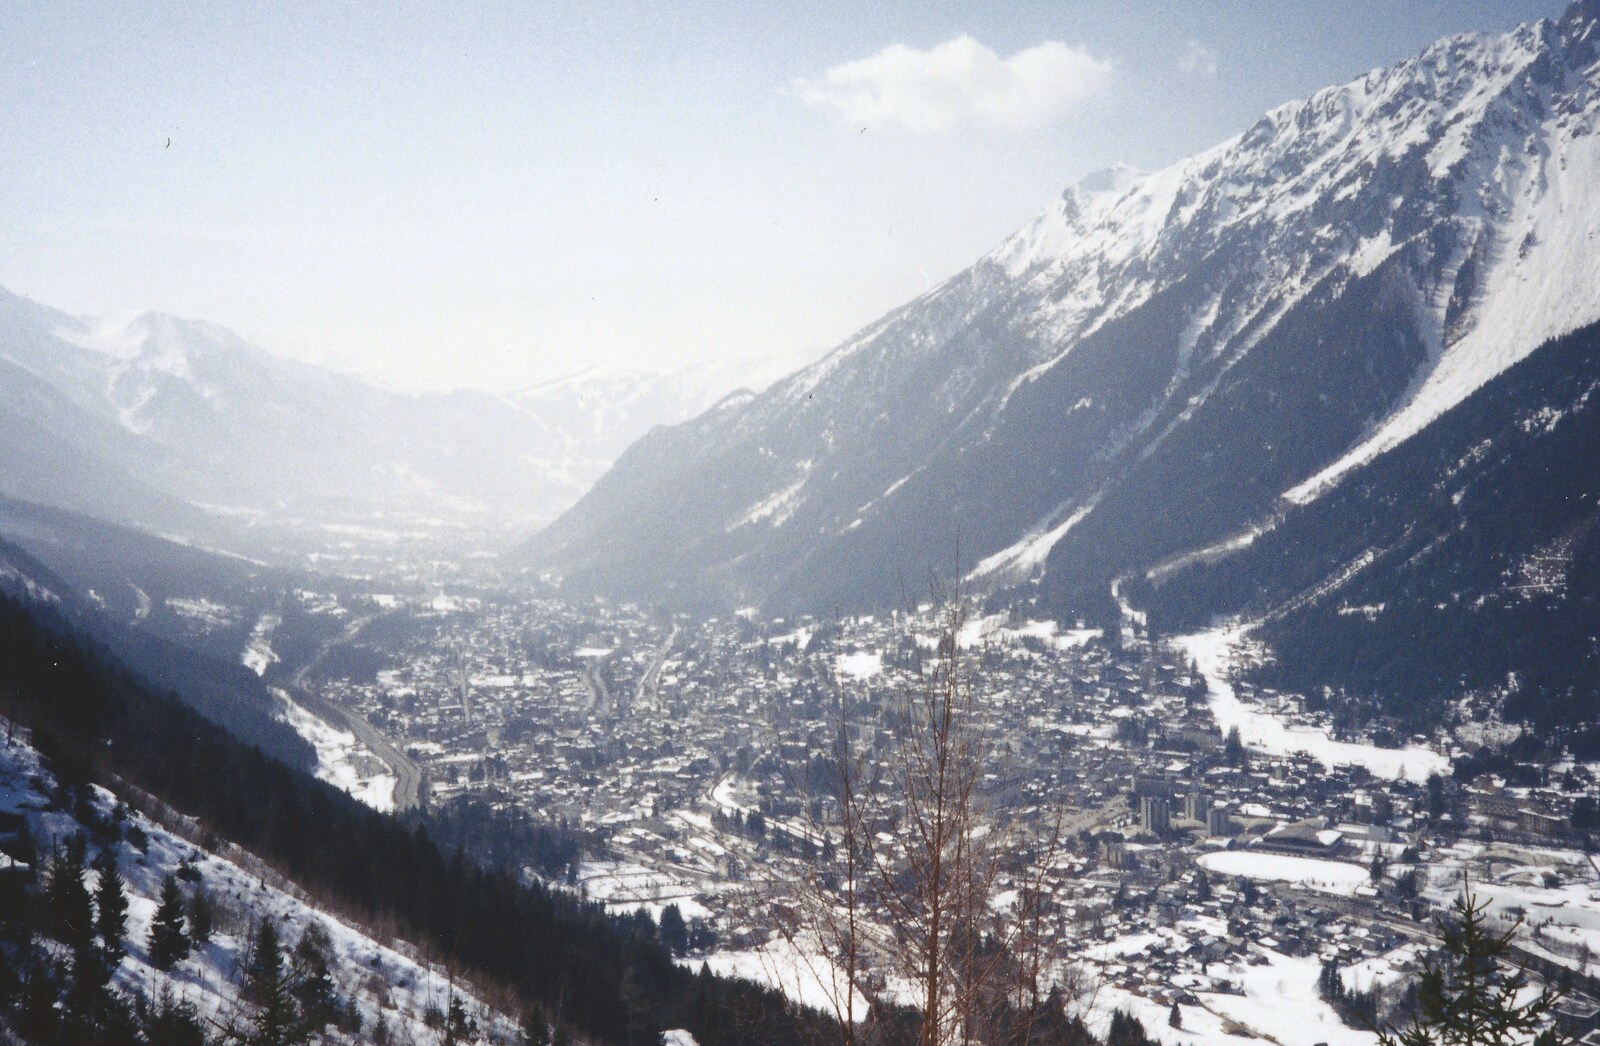 Skiing With Sean, Chamonix, Haute-Savoie, France - 15th March 1999: A view of Chamonix from up the teleferique